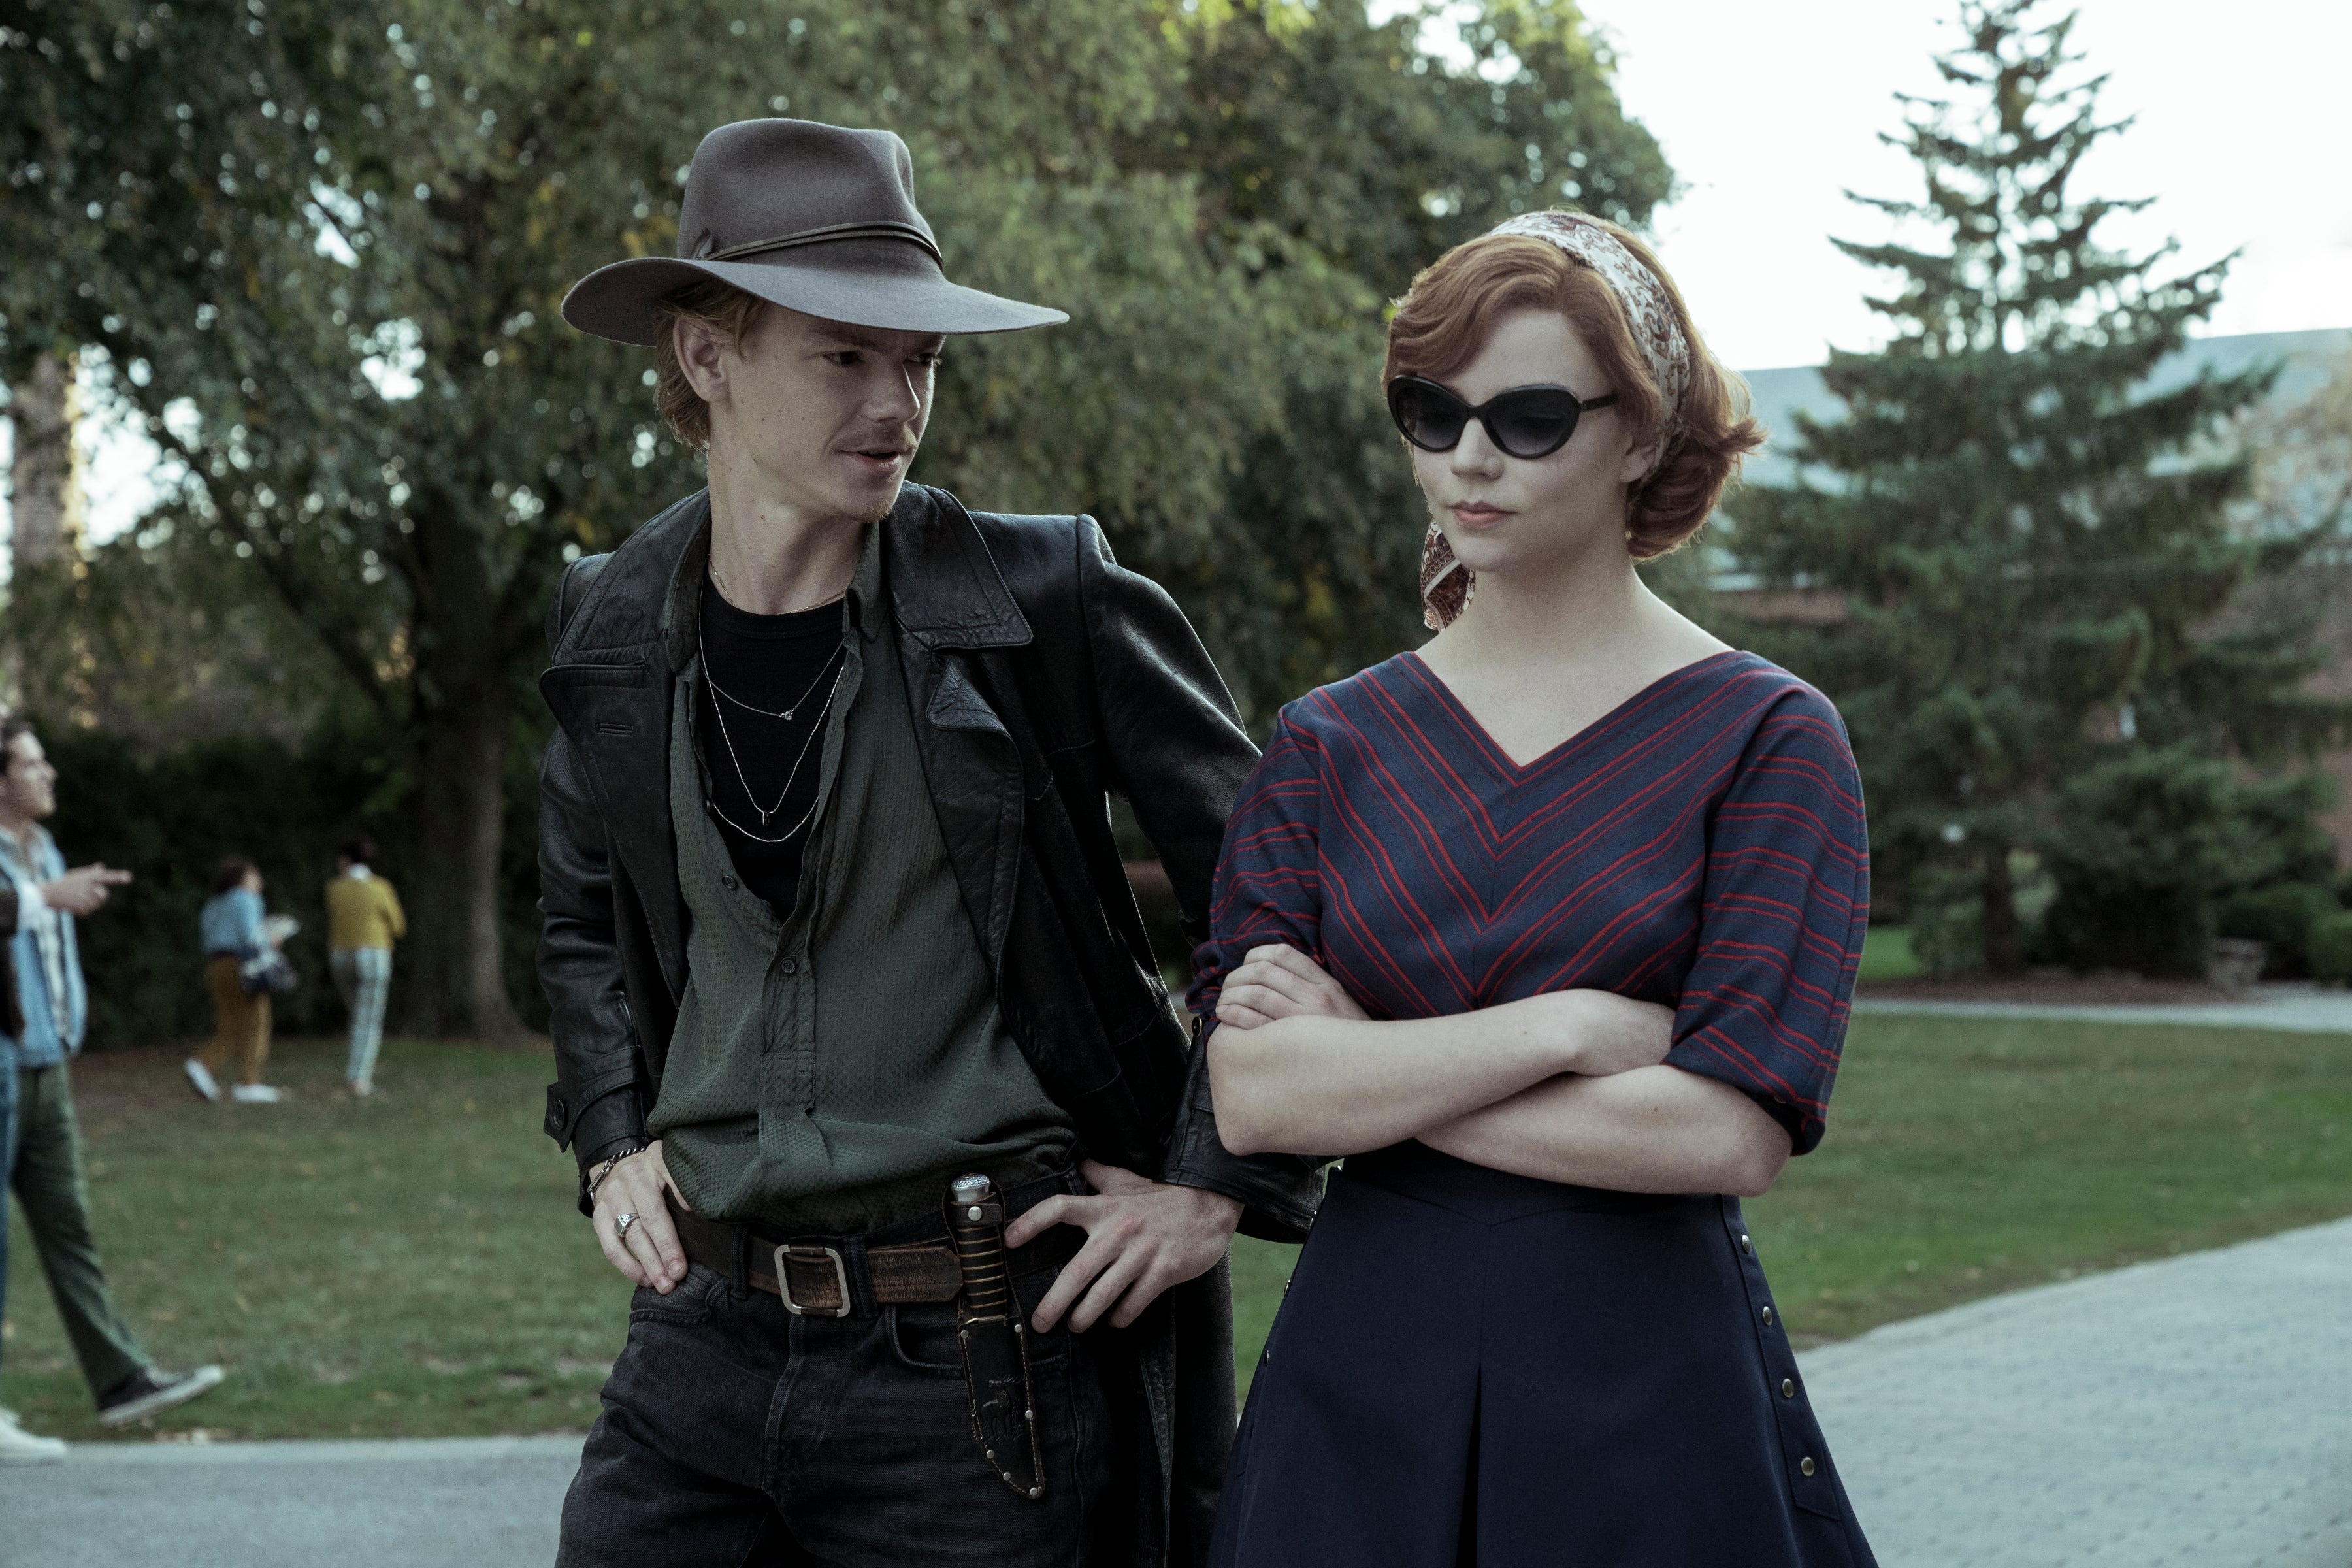 A man stands, hands on hips, in a cowboy hat and leather trenchcoat, next to a skeptical woman in sunglasses.